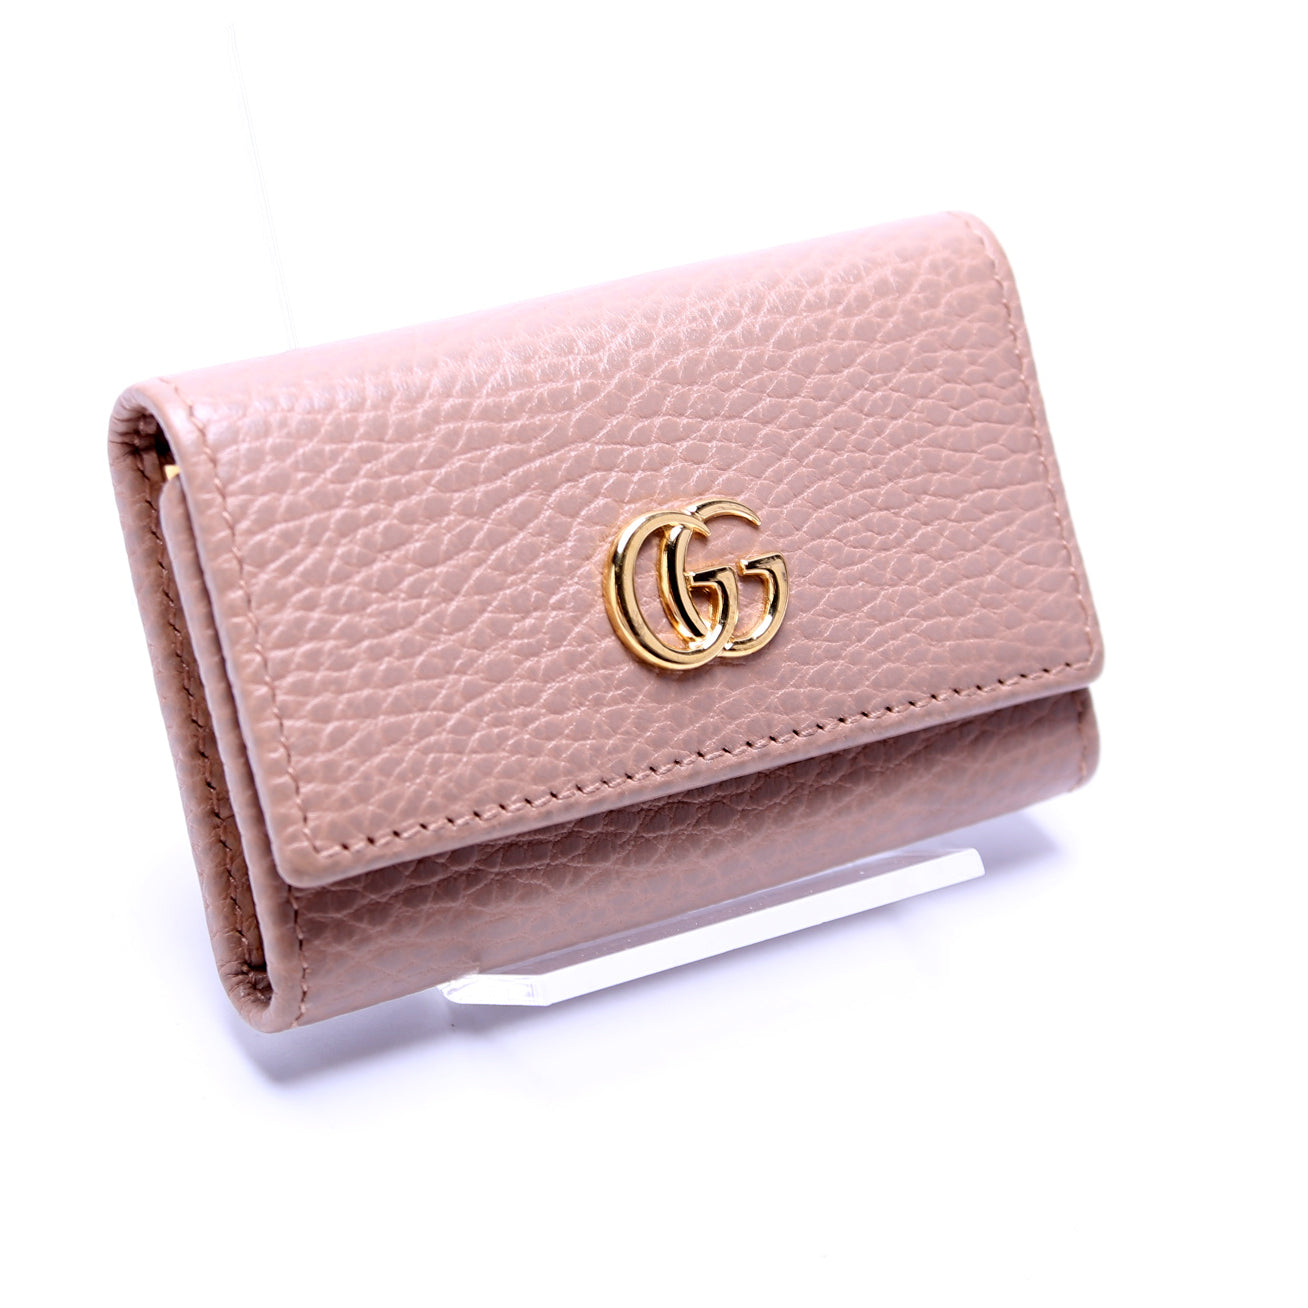 Gucci 456118 17WAG GG MARMONT Key holder Pink